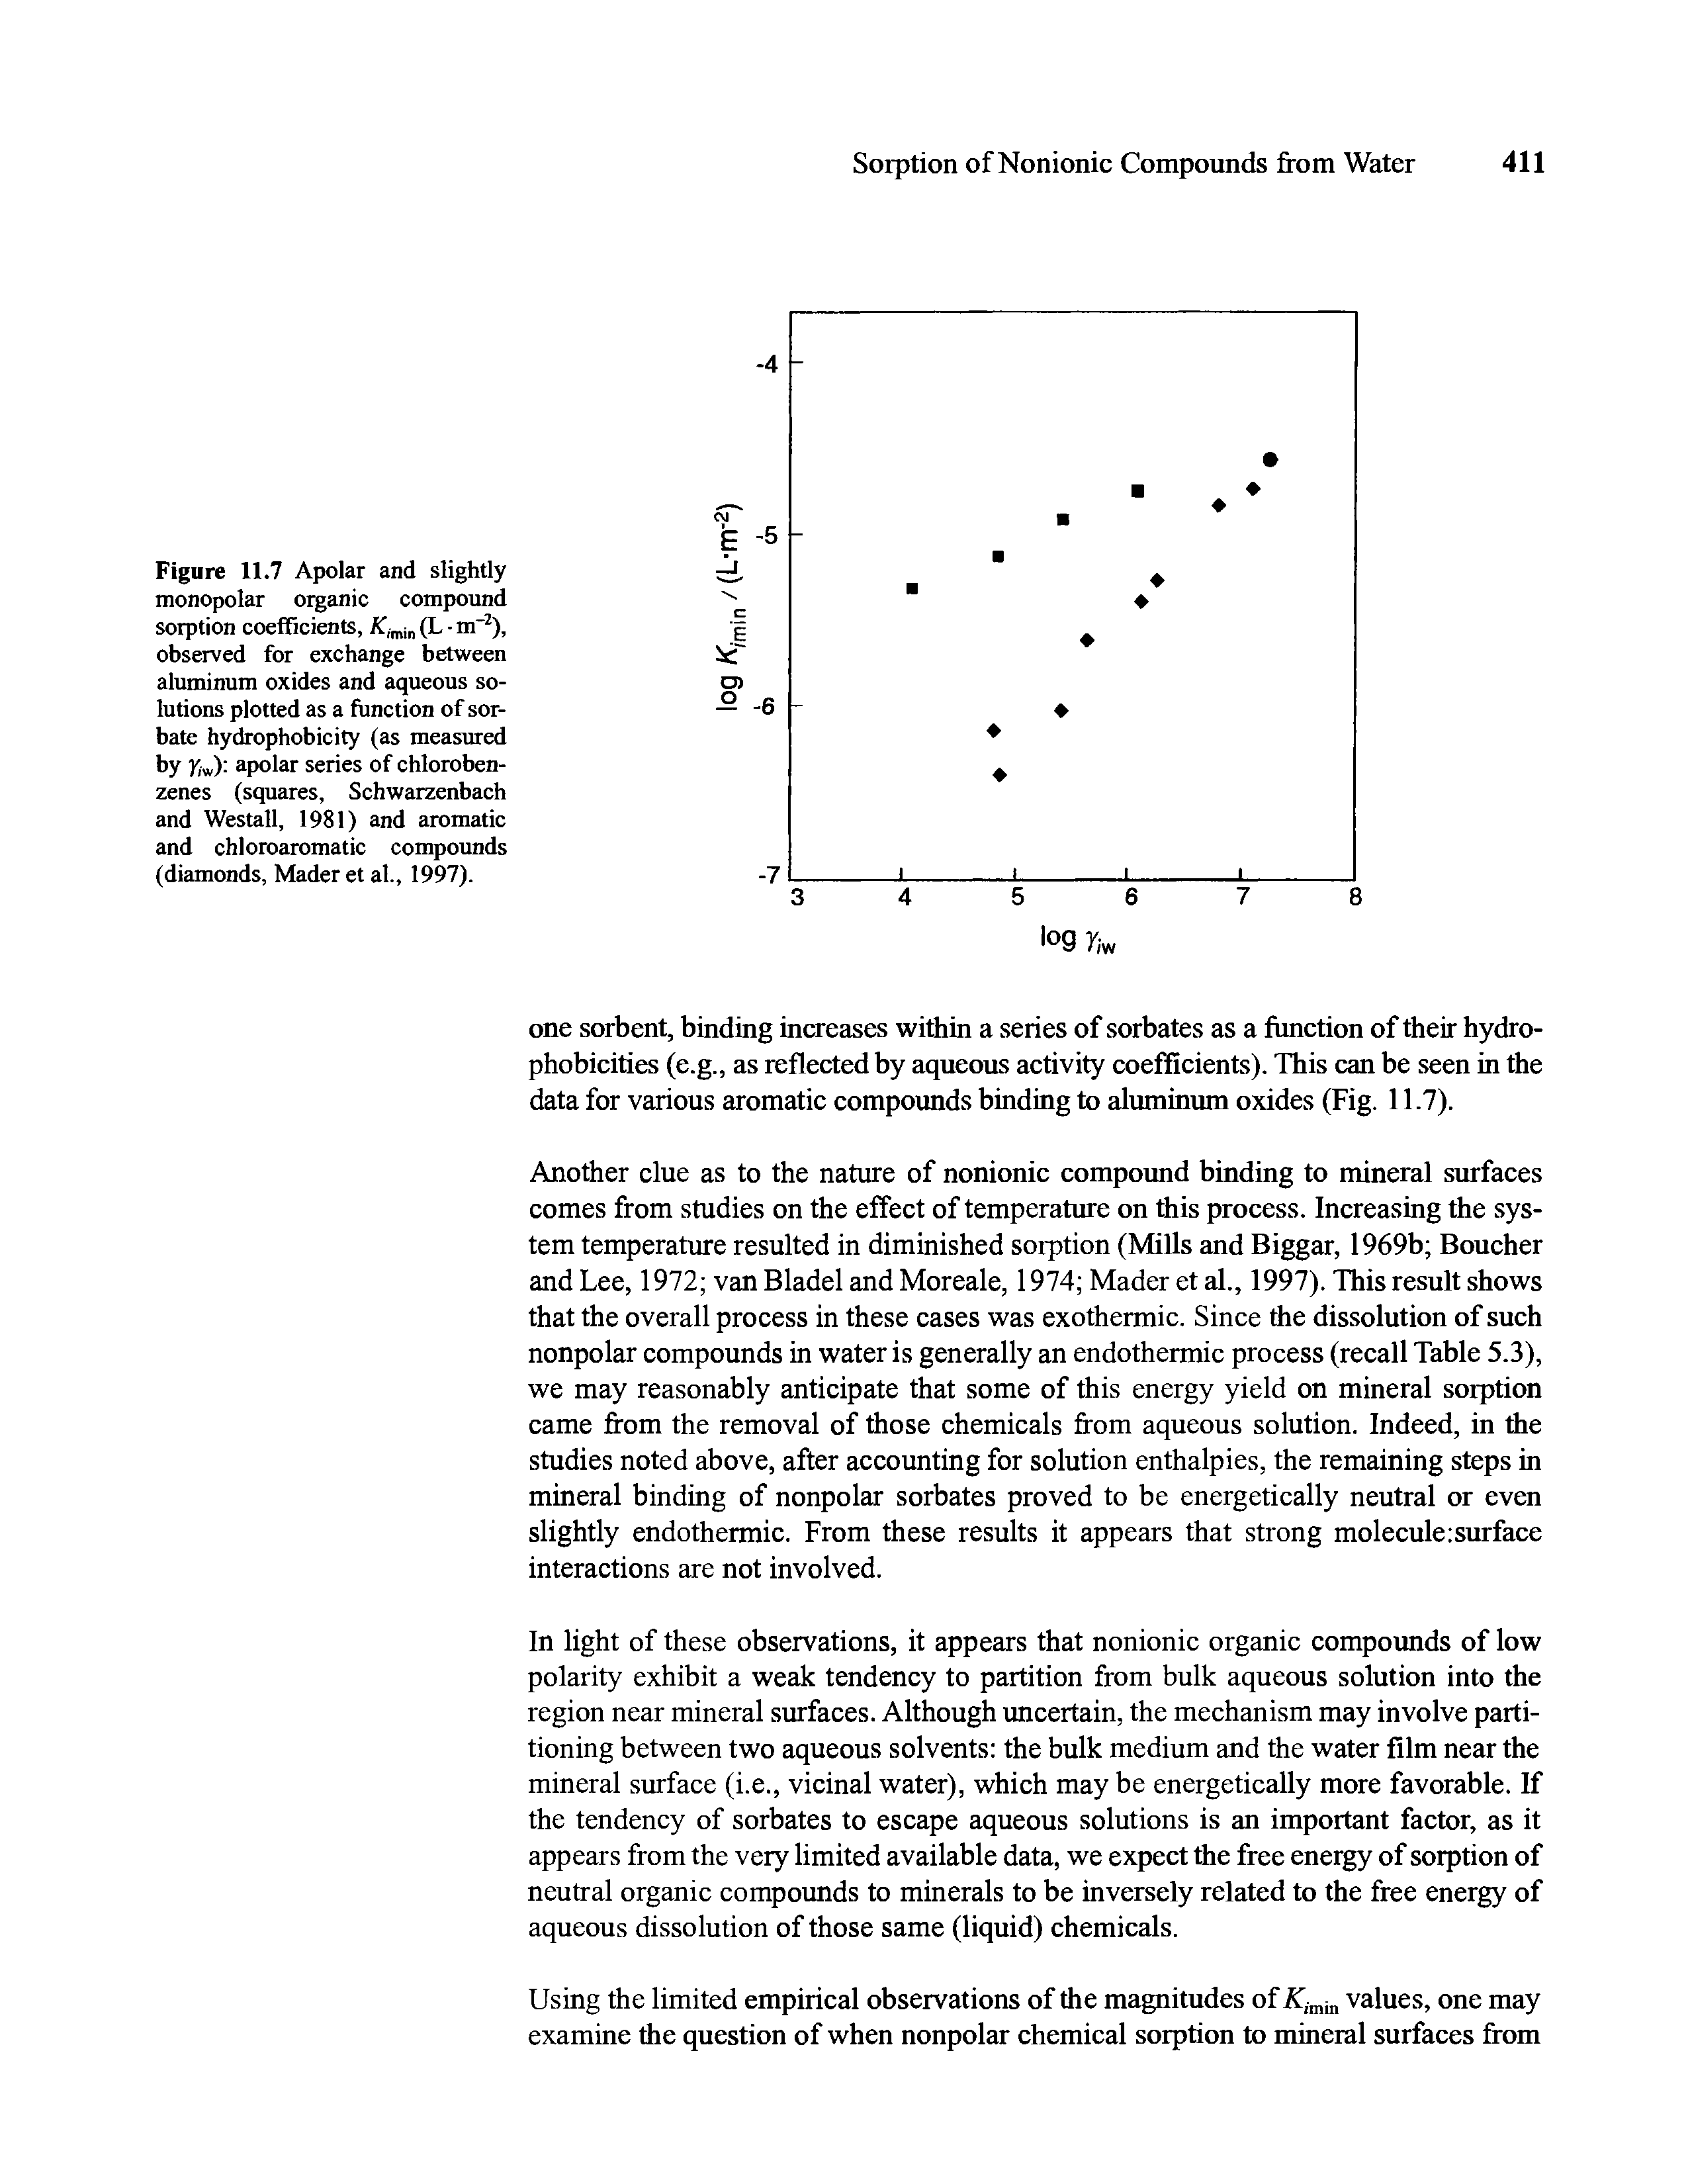 Figure 11.7 Apolar and slightly monopolar organic compound sorption coefficients, K,min (L nr2), observed for exchange between aluminum oxides and aqueous solutions plotted as a function of sor-bate hydrophobicity (as measured by yw) apolar series of chlorobenzenes (squares, Schwarzenbach and Westall, 1981) and aromatic and chloroaromatic compounds (diamonds, Maderet al., 1997).